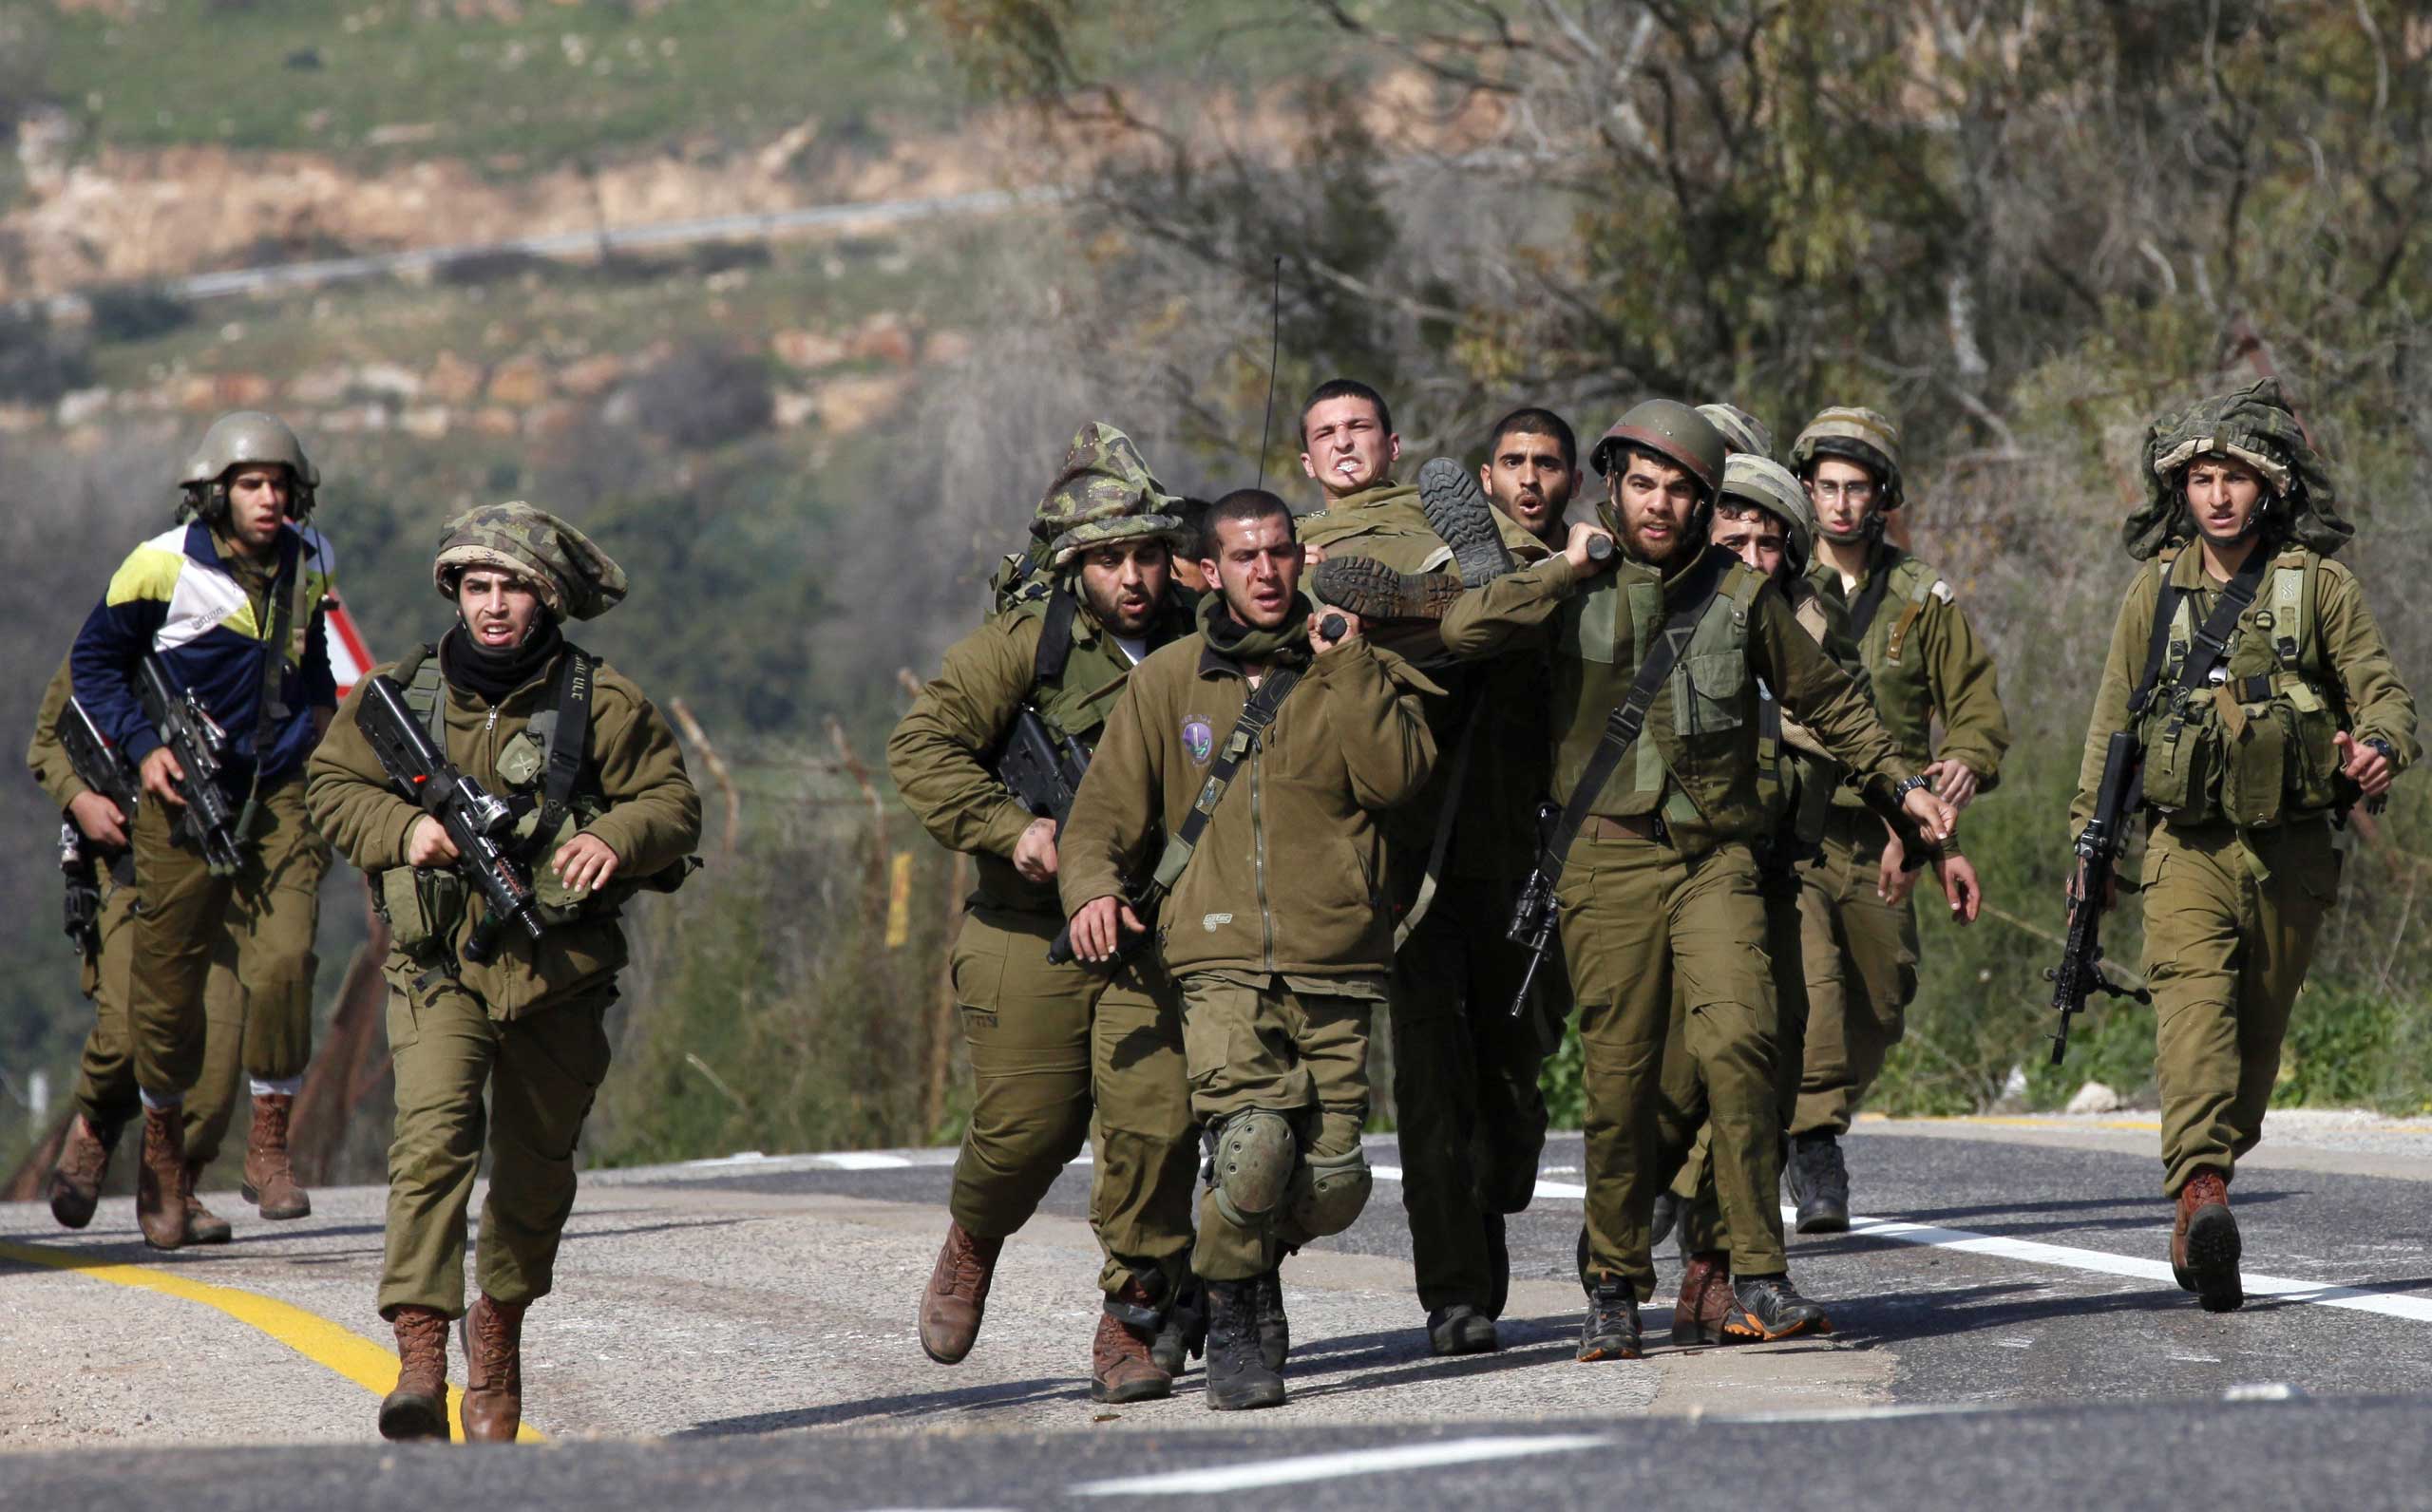 Israeli soldiers carry an injured comrade after an anti-tank missile hit an army vehicle in an occupied area on the border with Lebanon on Jan. 28, 2015.